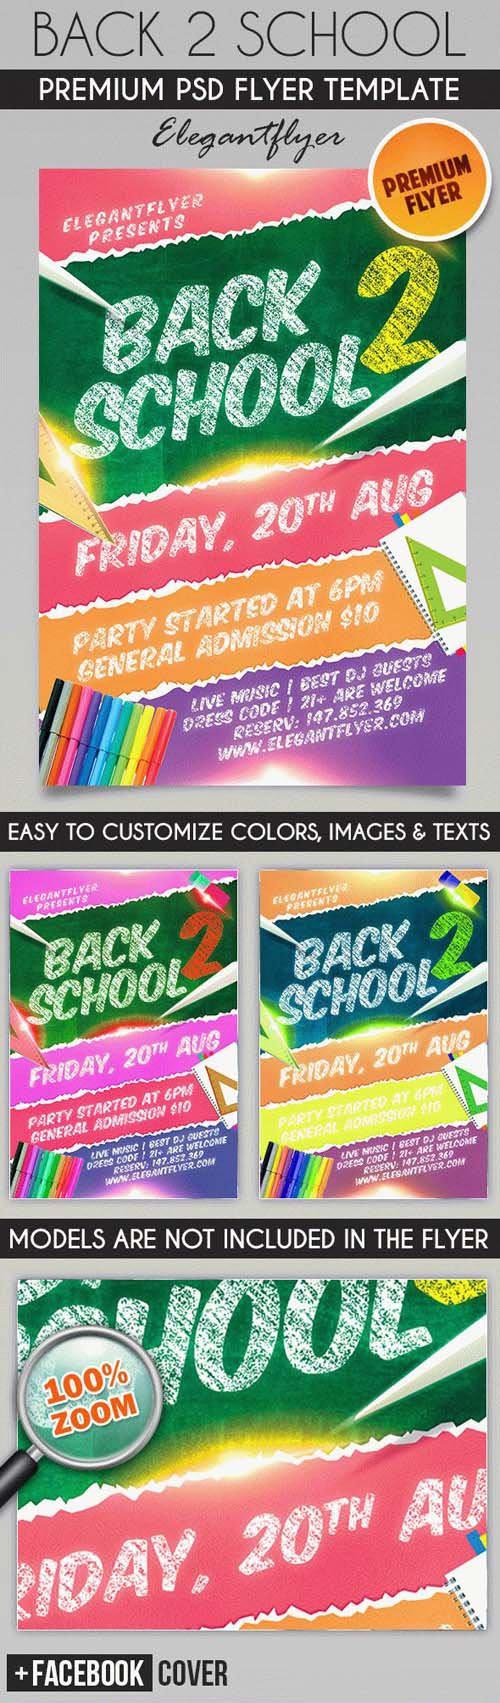 Party for Going Back to School PSD Flyer